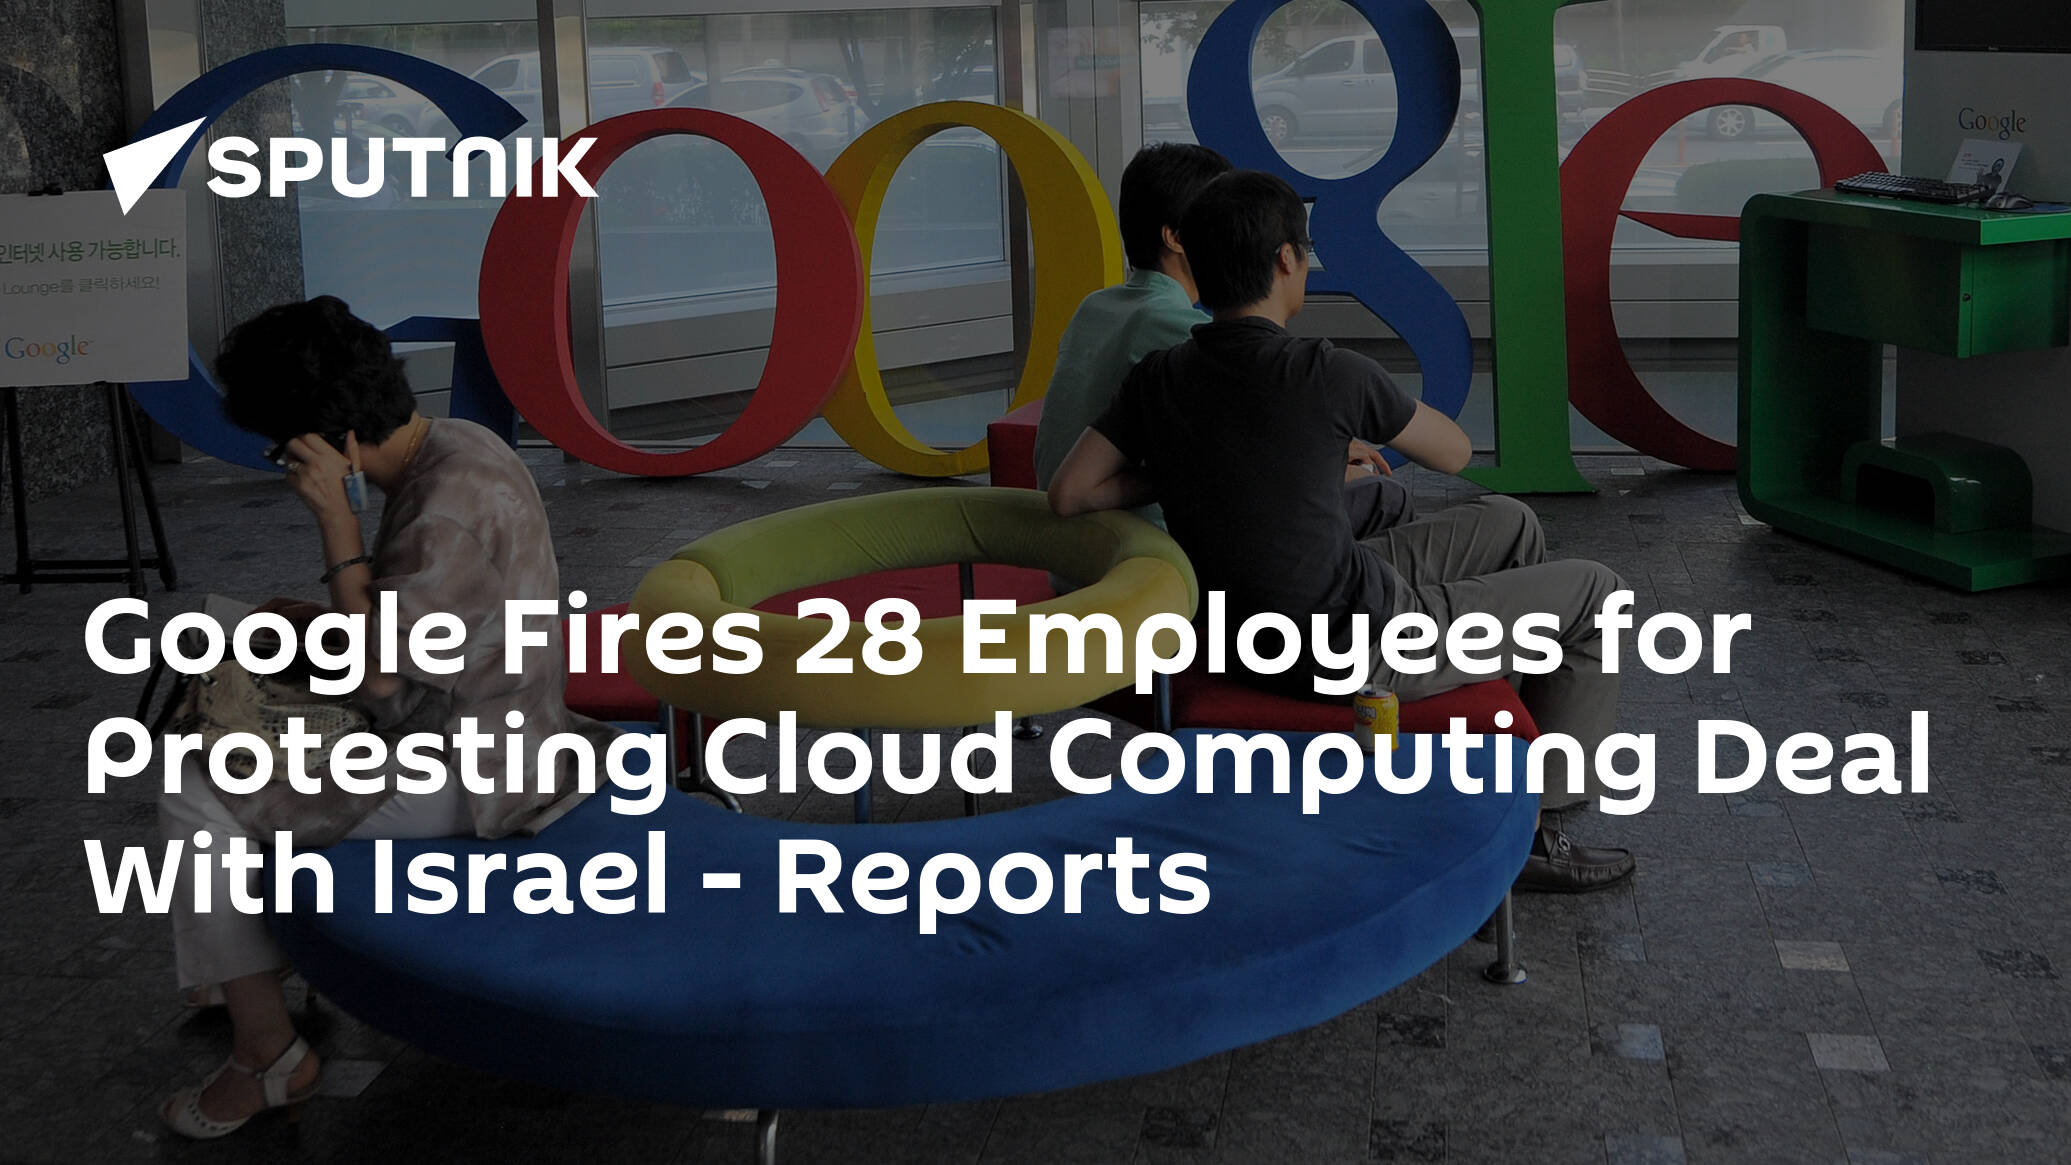 Google Fires 28 Employees for Protesting Cloud Computing Deal With